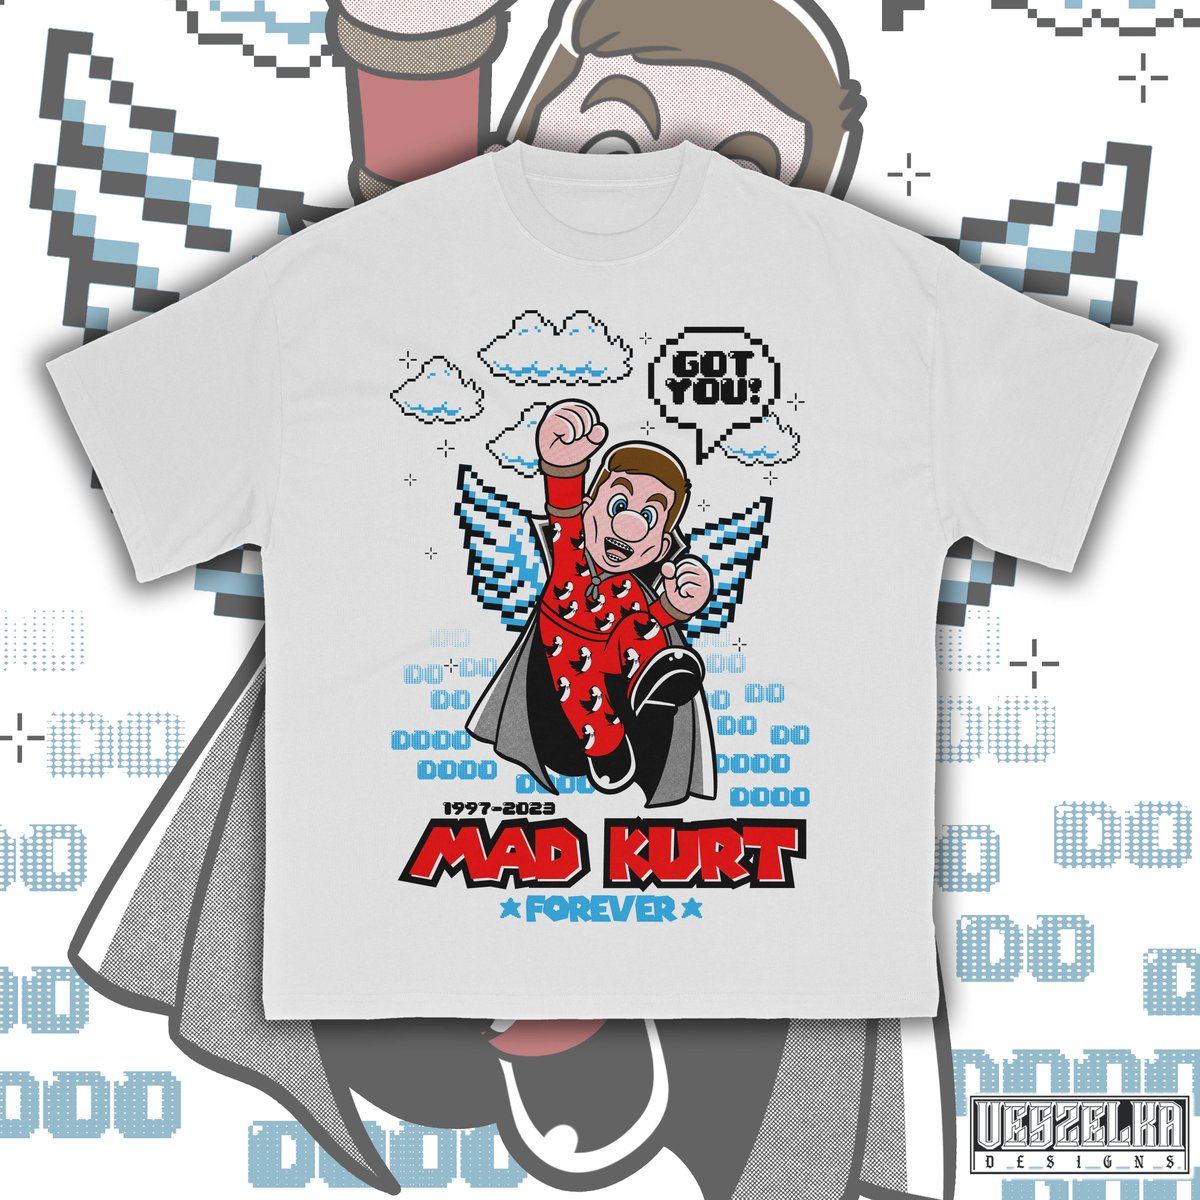 MAD KURT FOREVER Brand new ‘Mad Kurt Forever’ t-shirt available now to pre-order! 100% of the money generated from sales of this t-shirt will be donated directly to the family of Kurtis Chapman. bitly.ws/38Svv